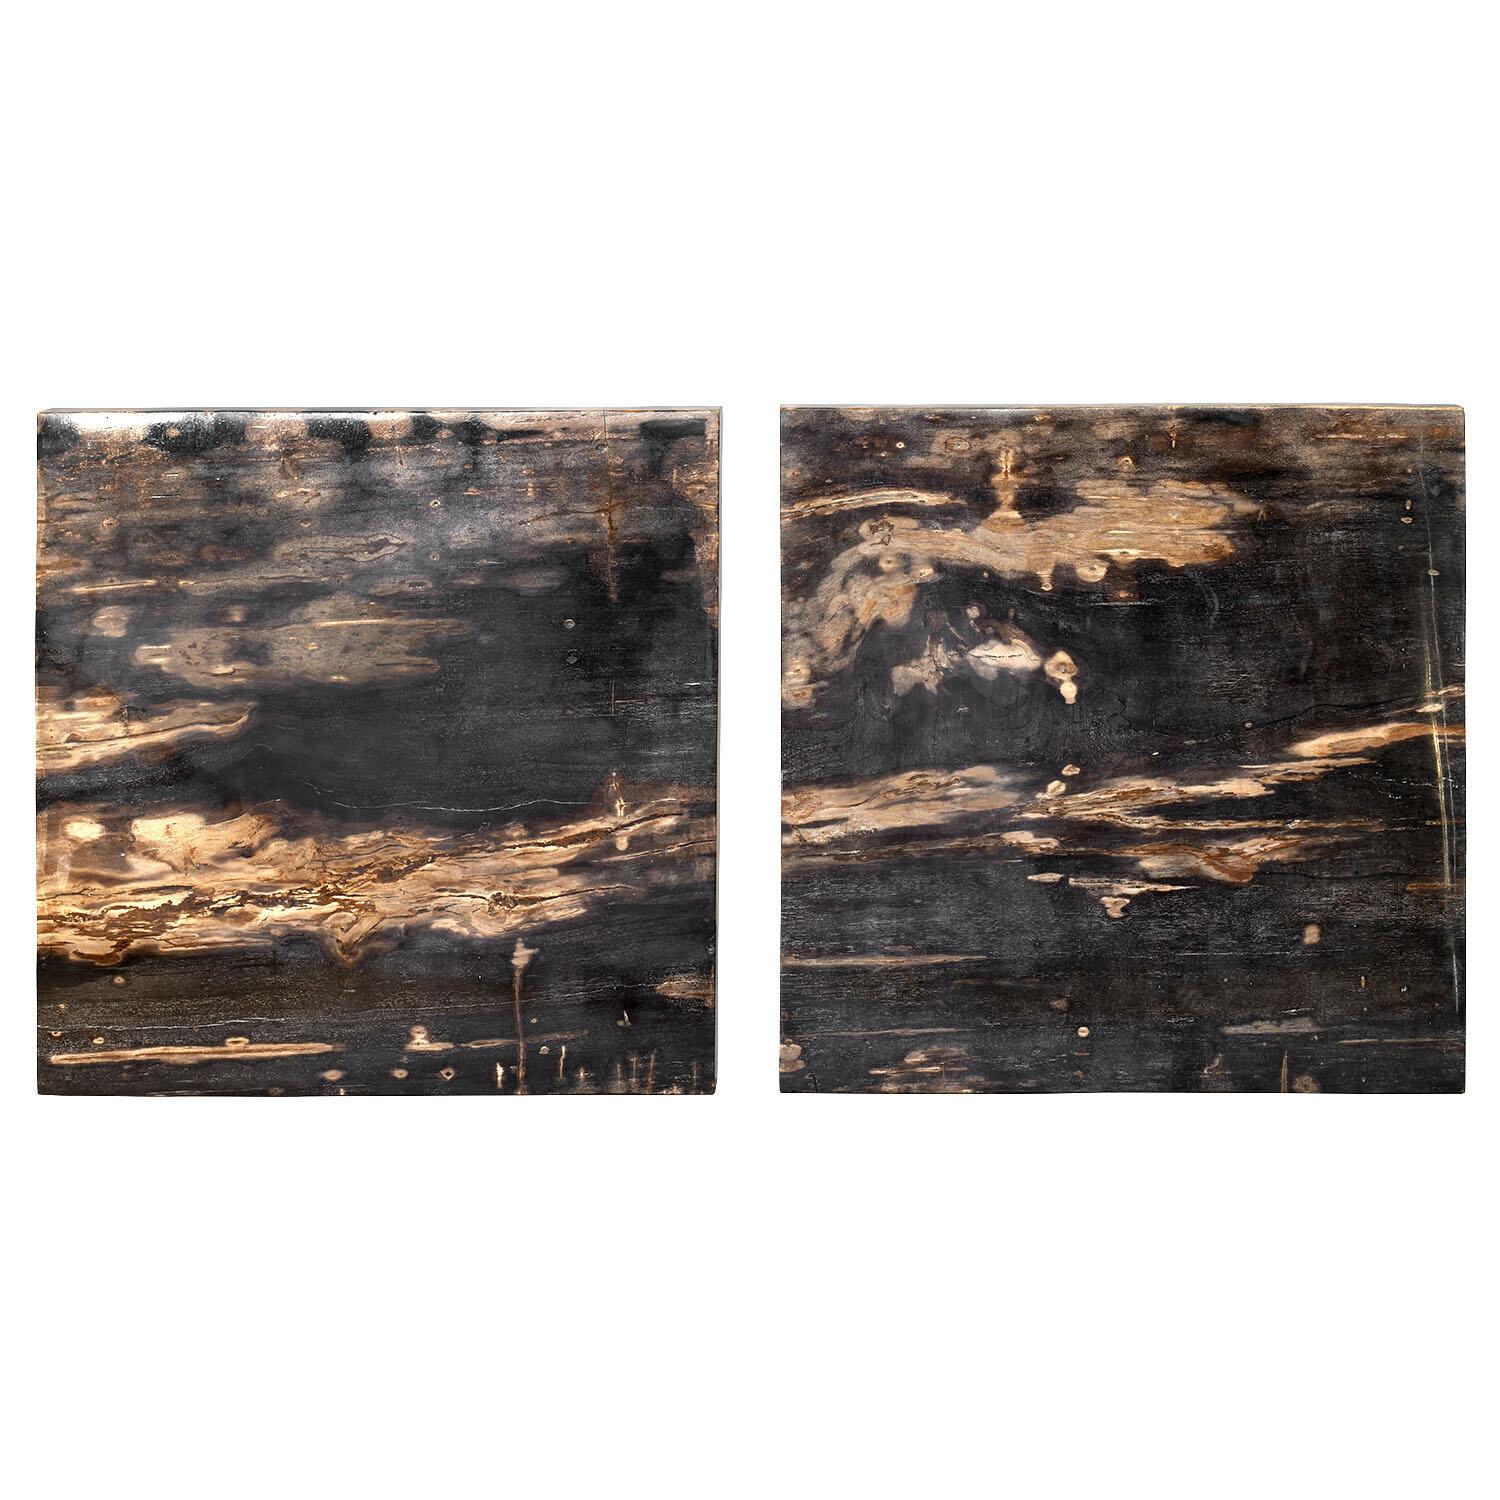 Other Set of Two Side Tables with Petrified Wood Tabletops from Indonesia For Sale